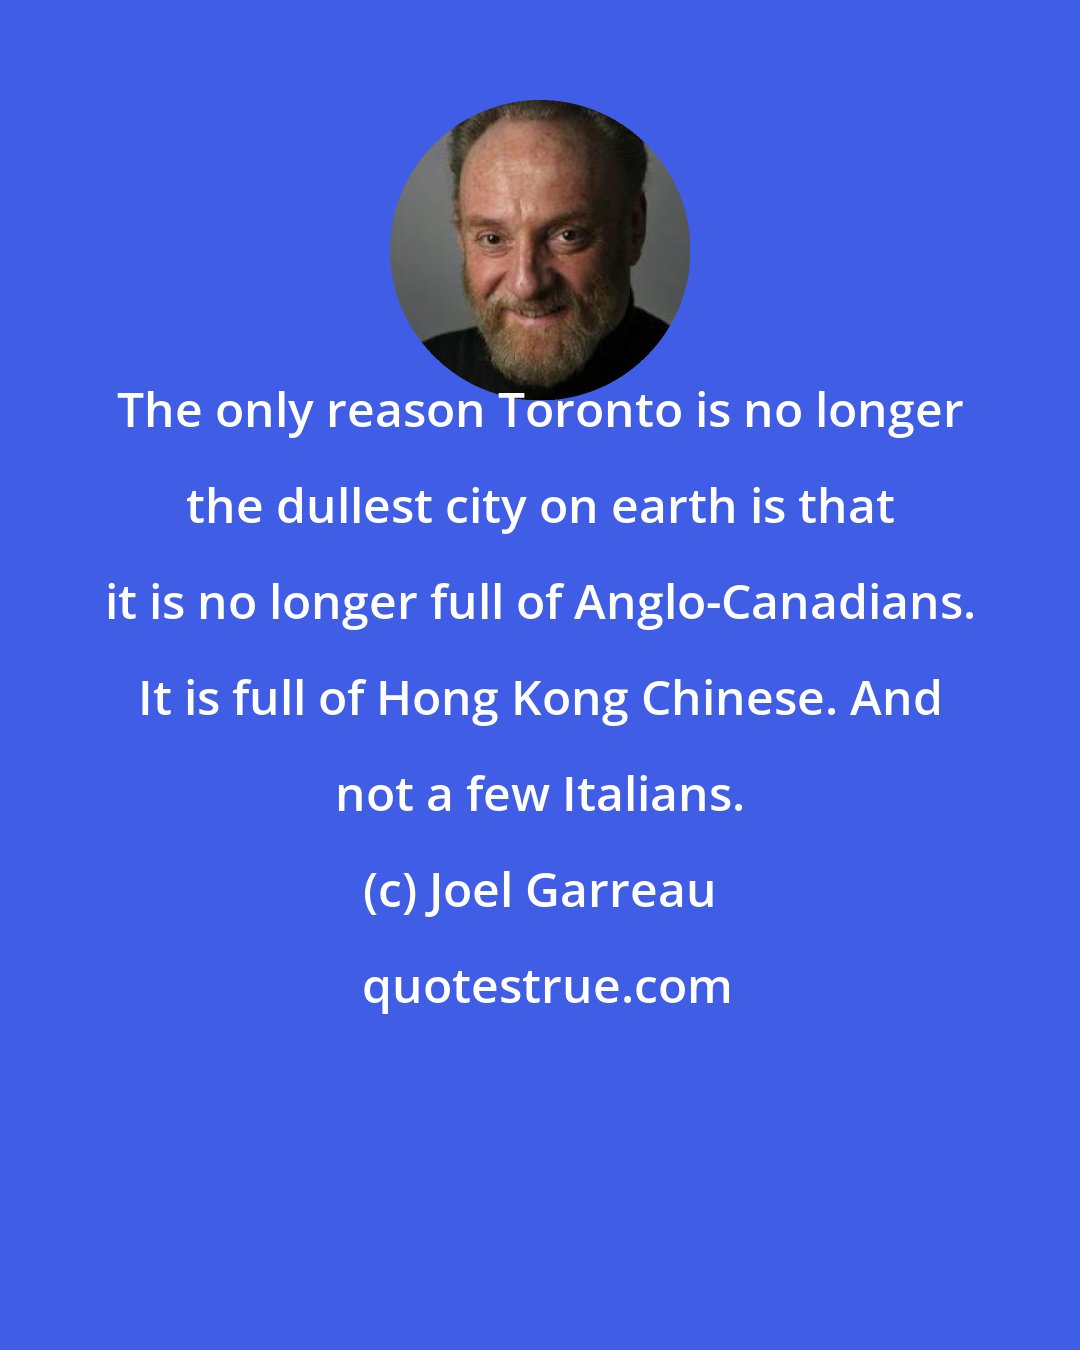 Joel Garreau: The only reason Toronto is no longer the dullest city on earth is that it is no longer full of Anglo-Canadians. It is full of Hong Kong Chinese. And not a few Italians.